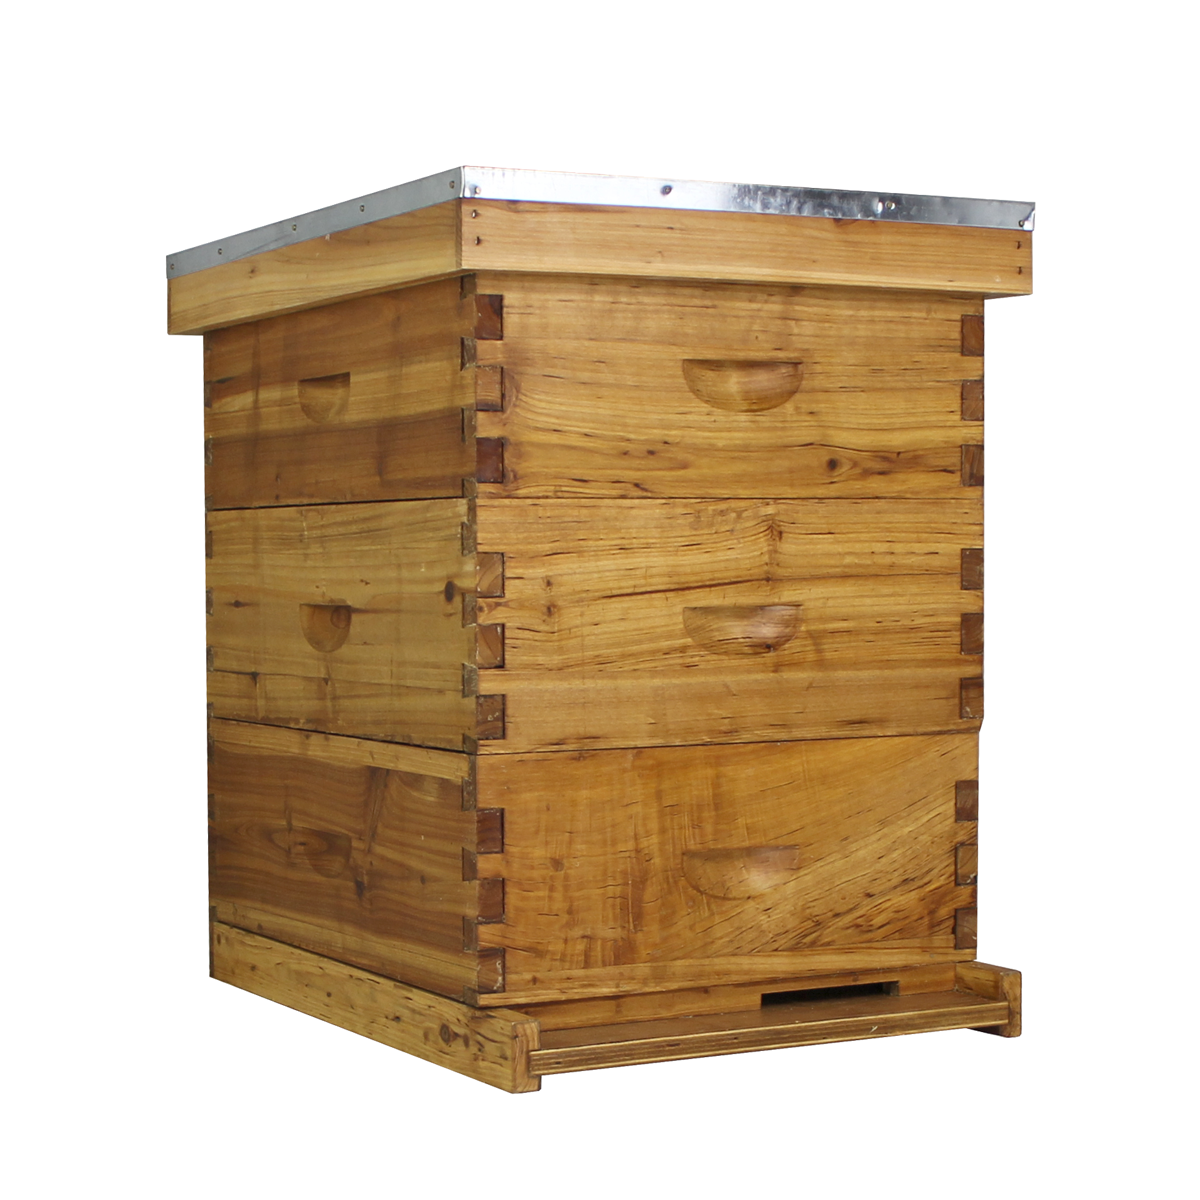 Hoover Hives Wax Coated 10 Frame Beehive With 0 Deep Bee Boxes & 3 Medium Bee Boxes